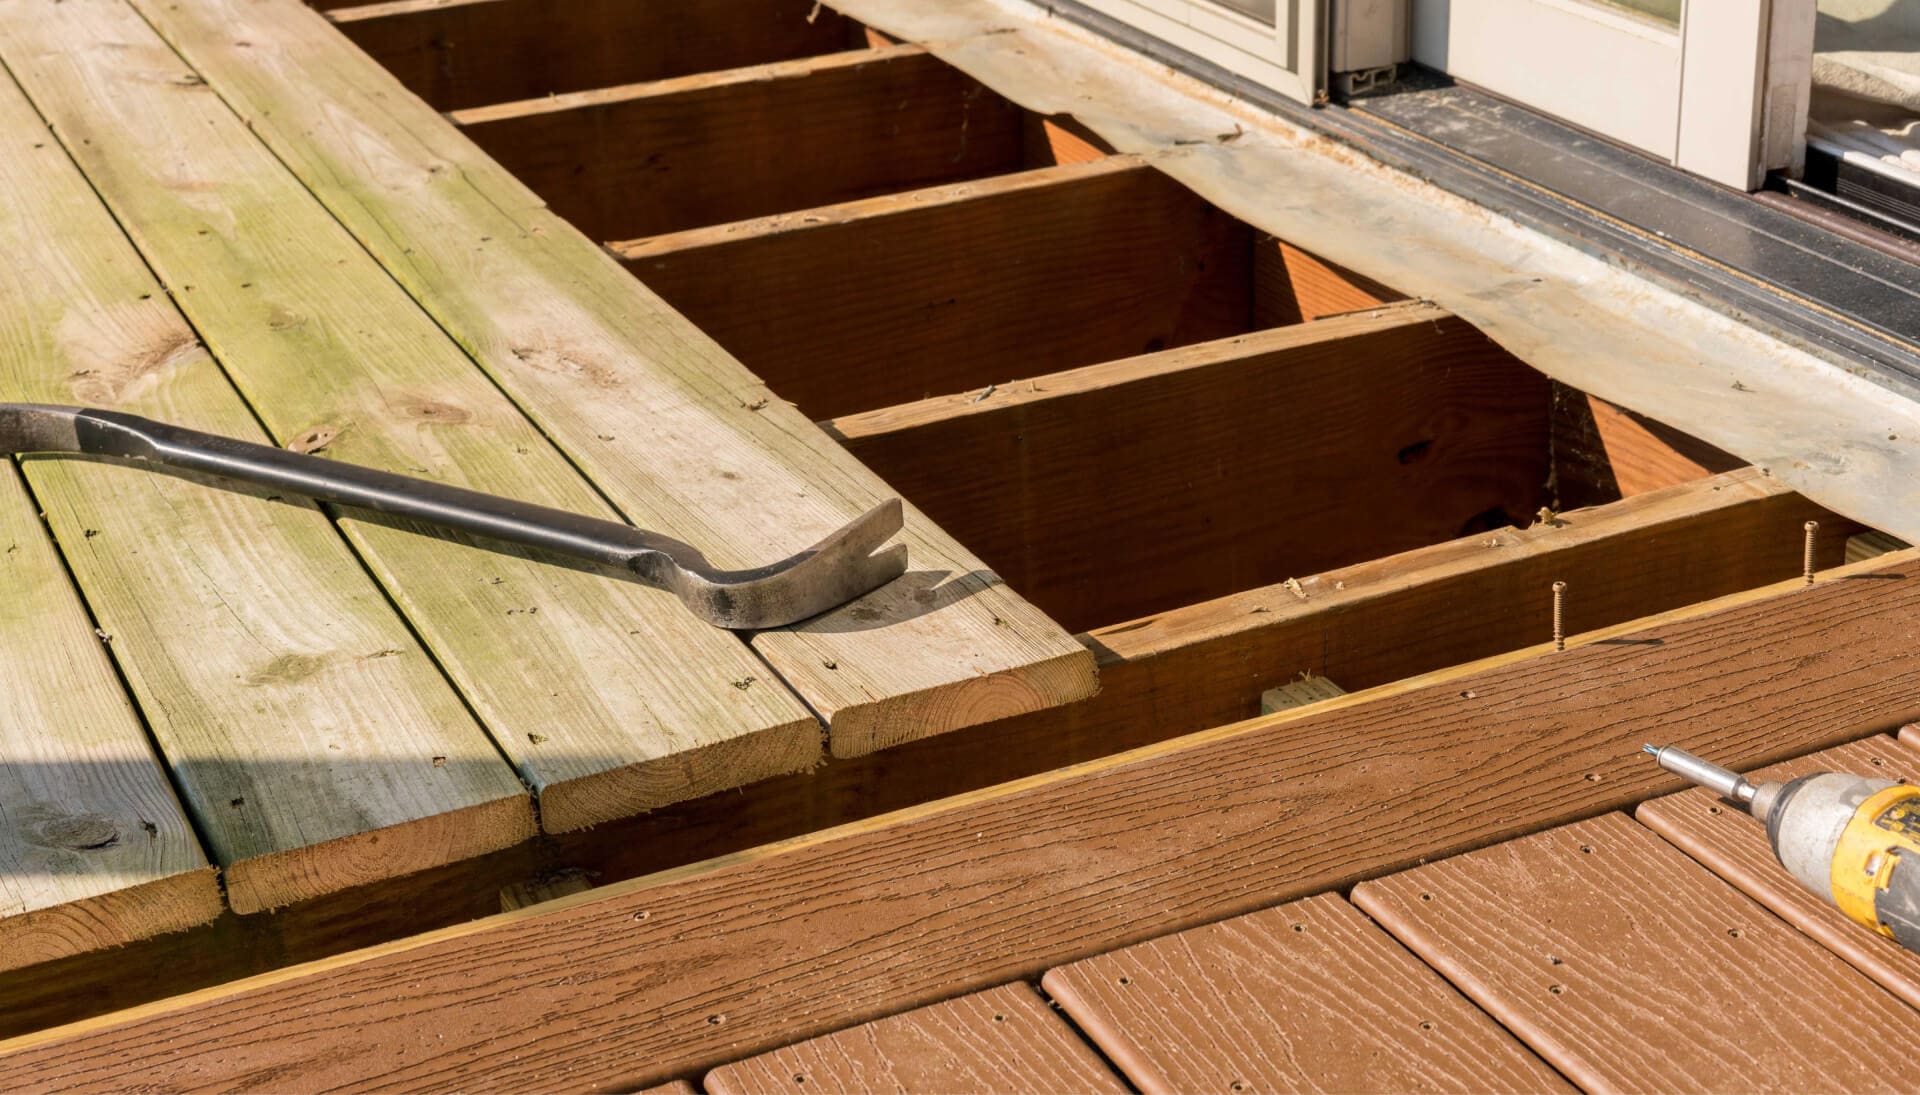 A professional deck repair service in Dayton, providing thorough inspections and maintenance to ensure the safety and durability of the structure